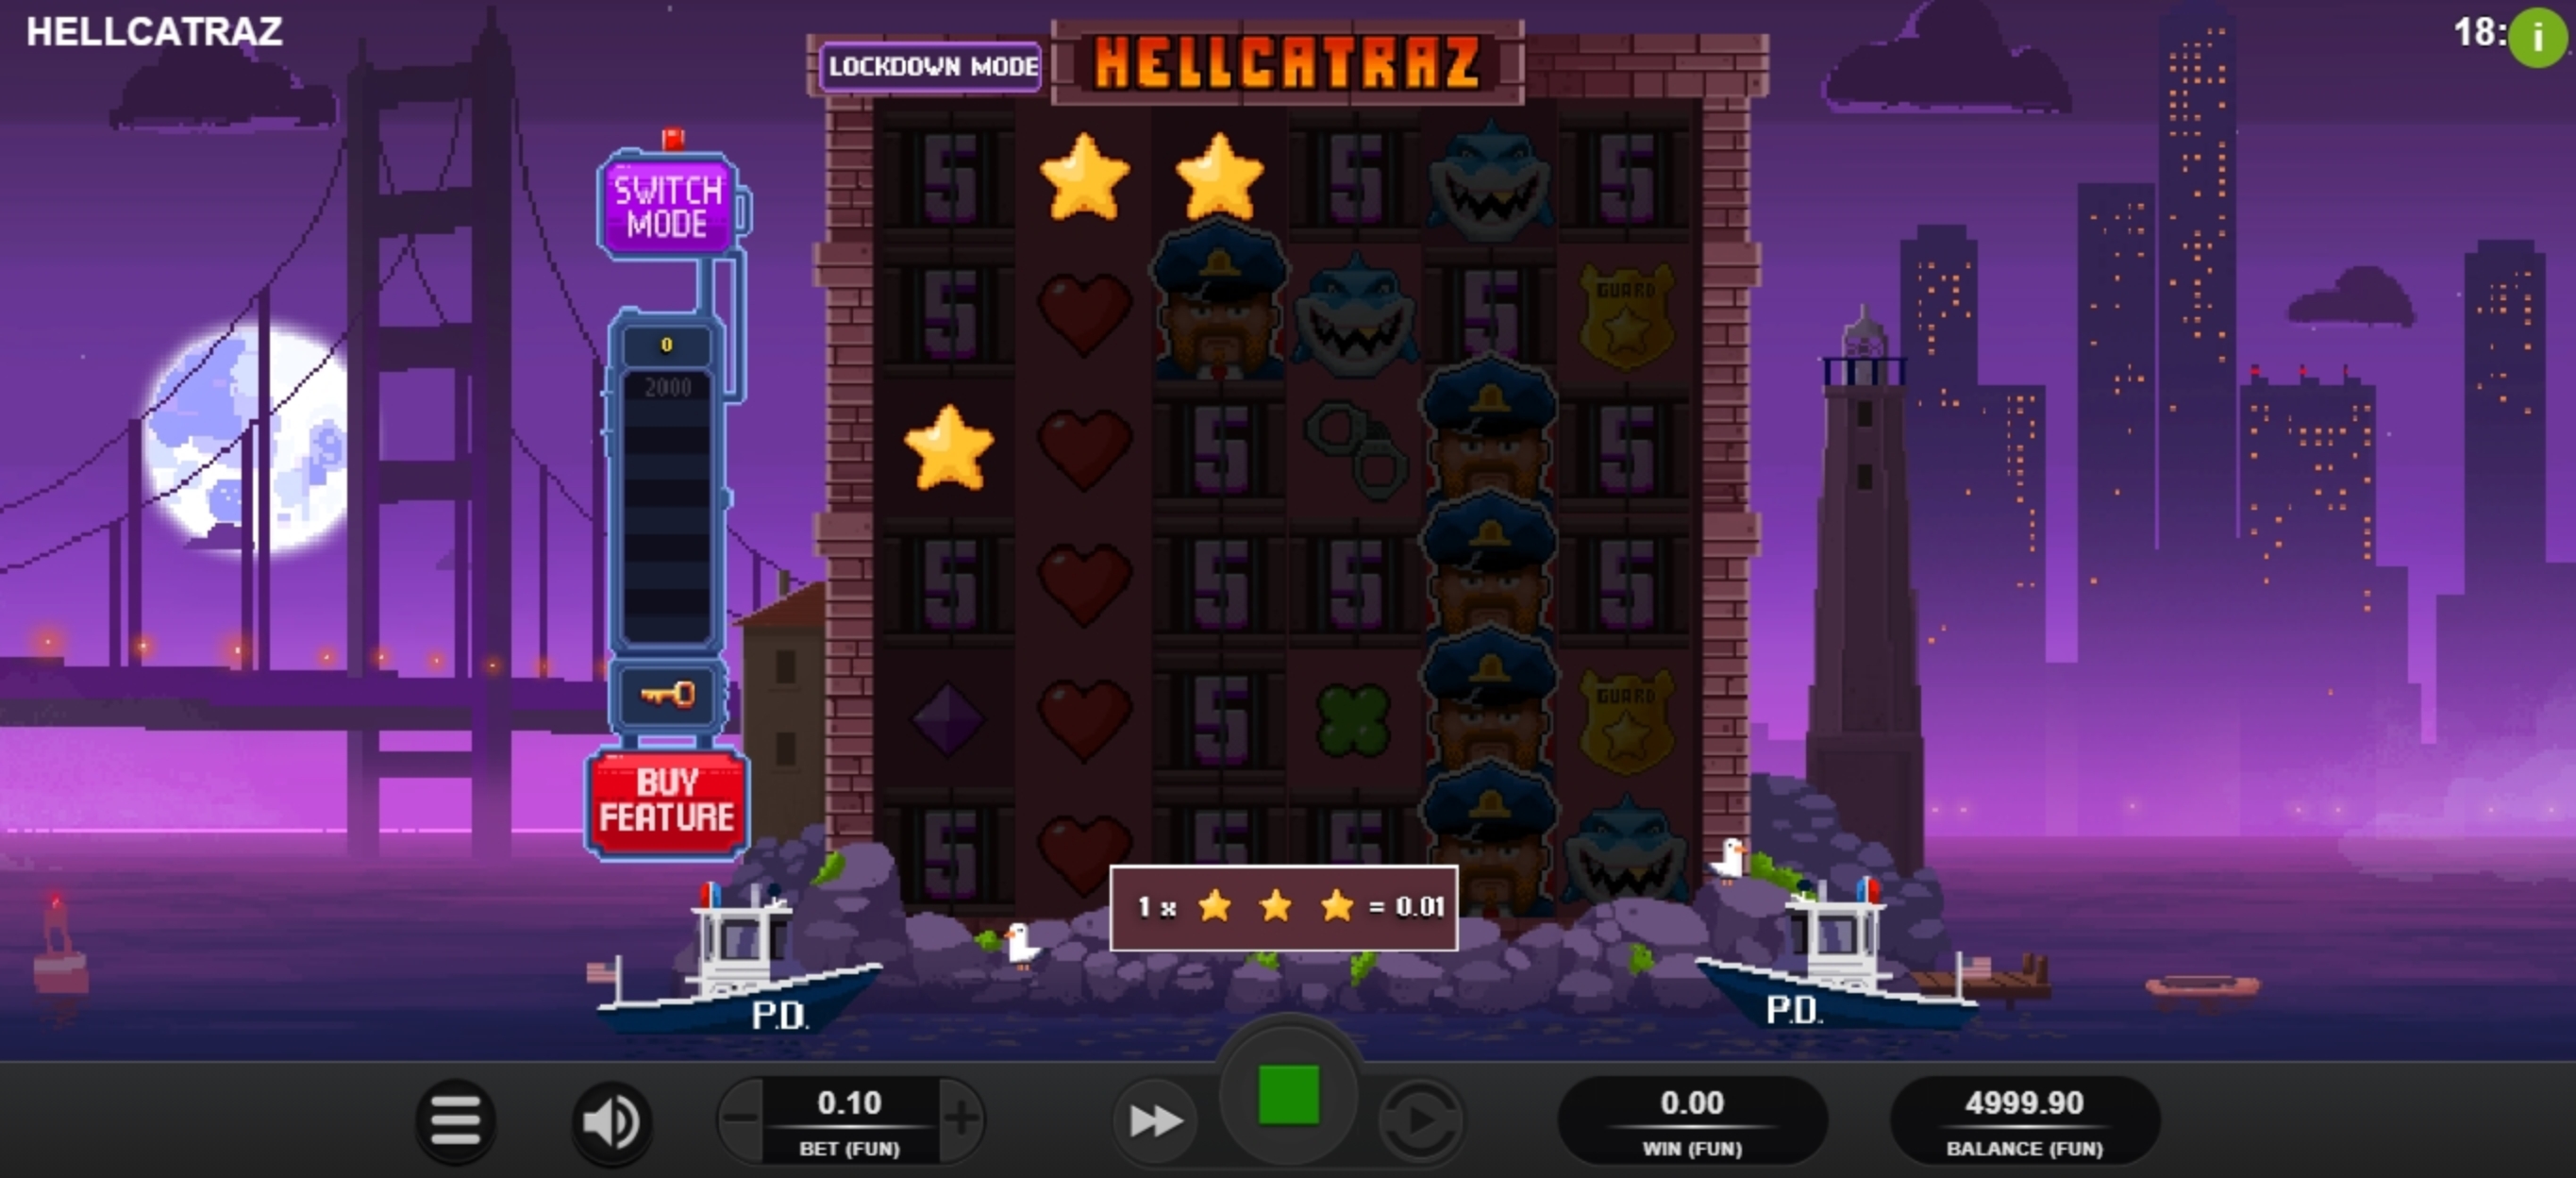 Win Money in Hellcatraz Free Slot Game by Relax Gaming